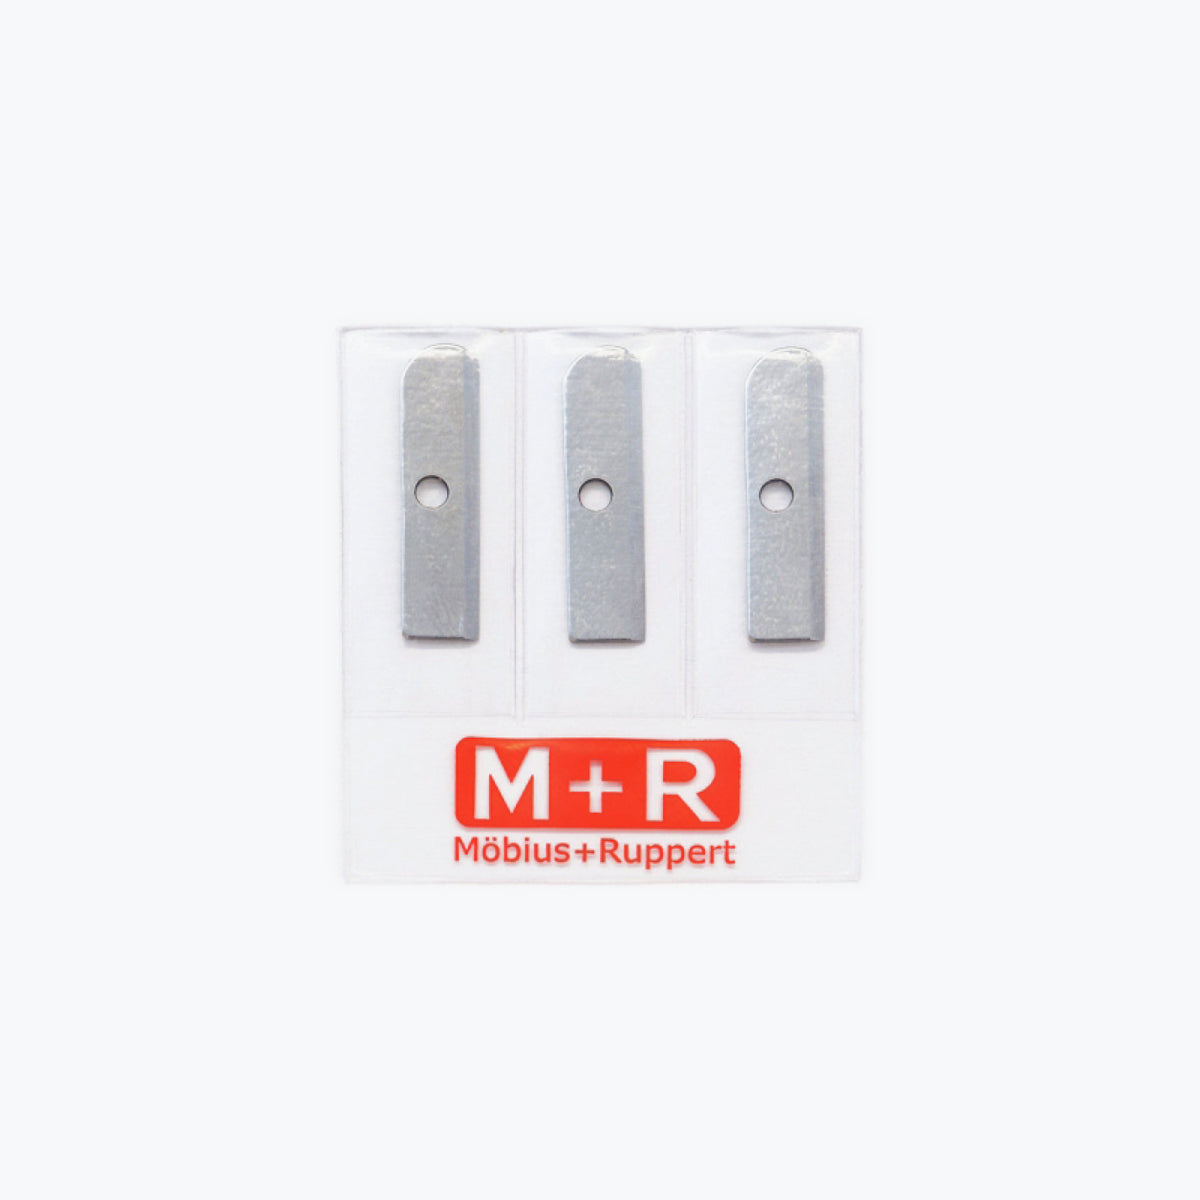 M+R - Replacement Blades - 6010 (Pollux and Castor)